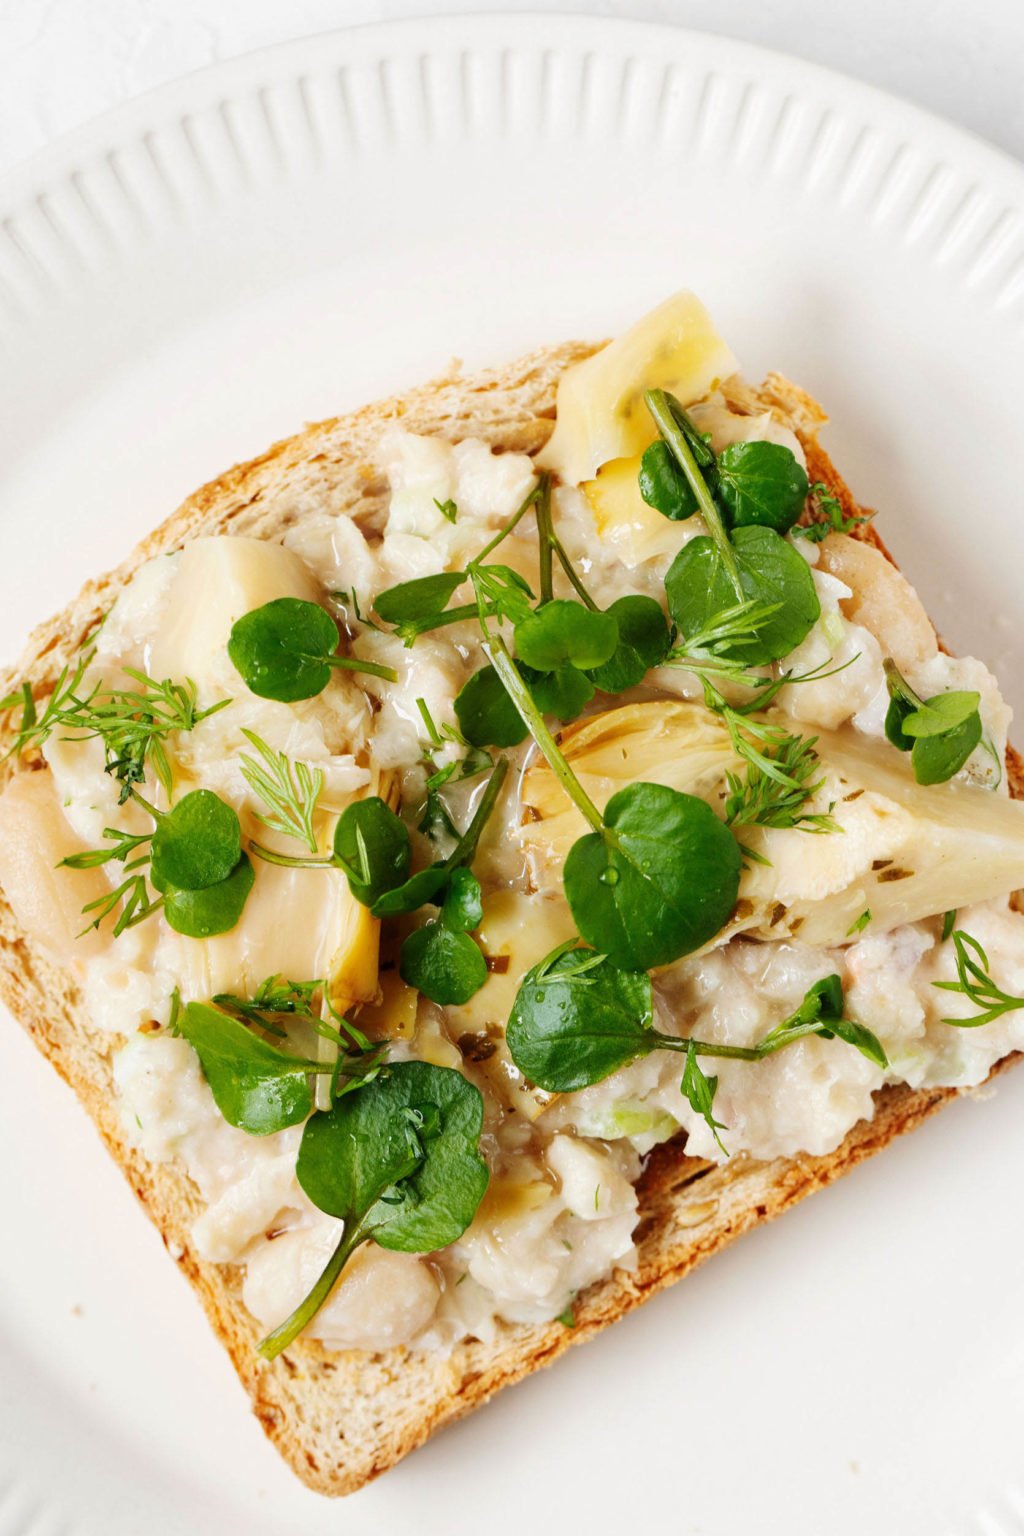 A slice of toast is topped with smashed white bean salad, artichokes, and microgreens.